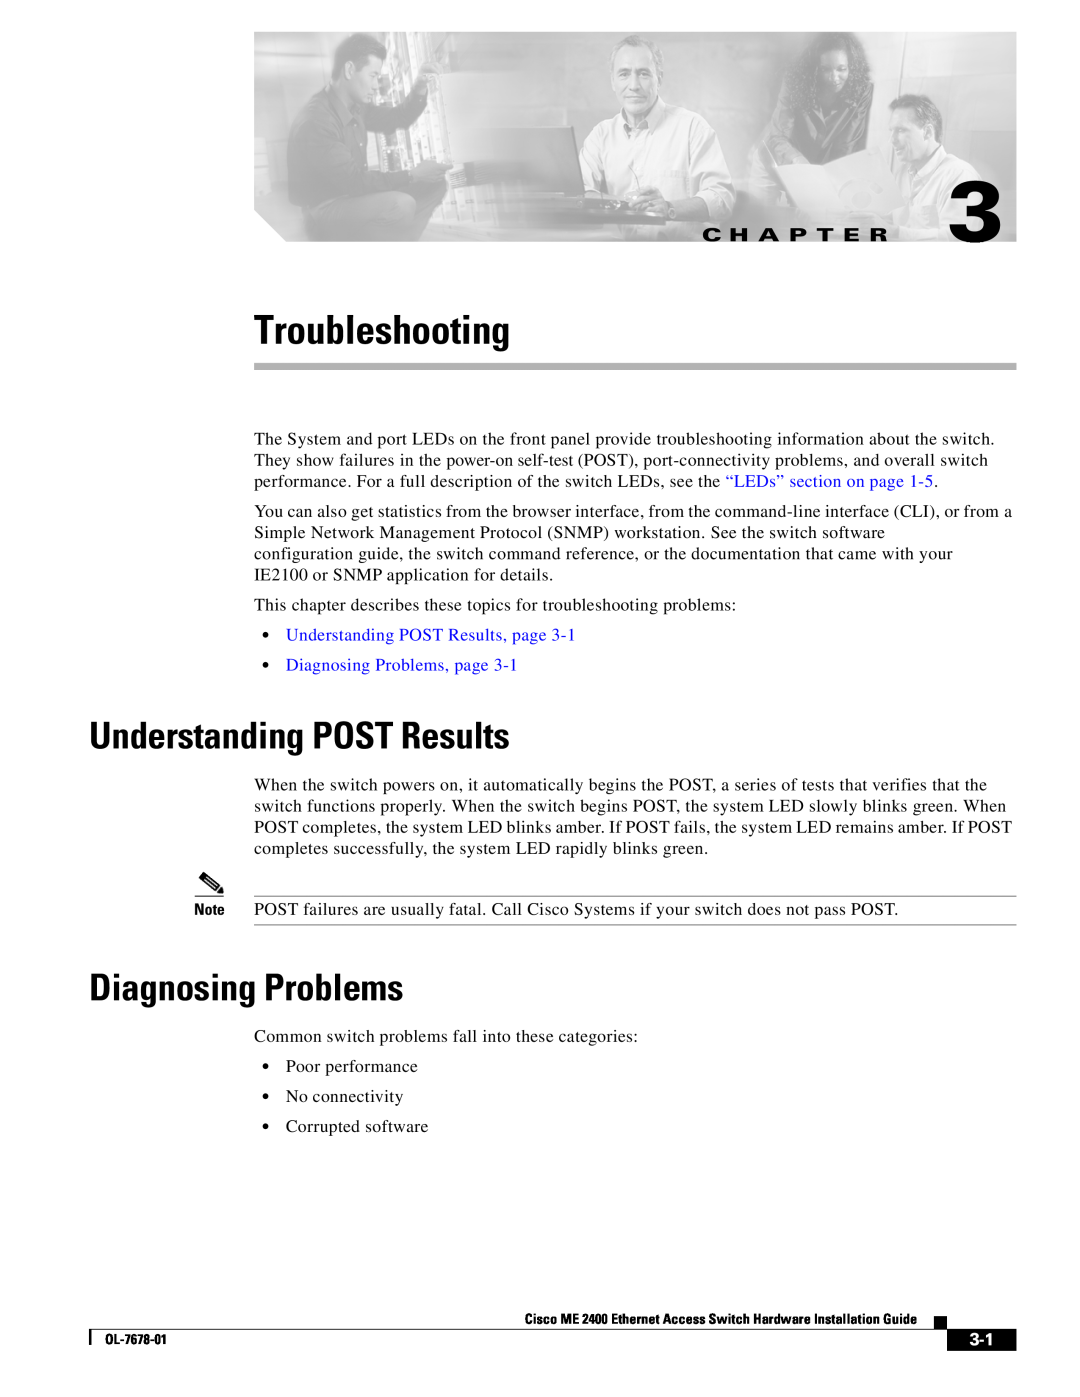 Cisco Systems ME 2400 manual Troubleshooting, Understanding POST Results, Diagnosing Problems, C H A P T E R 